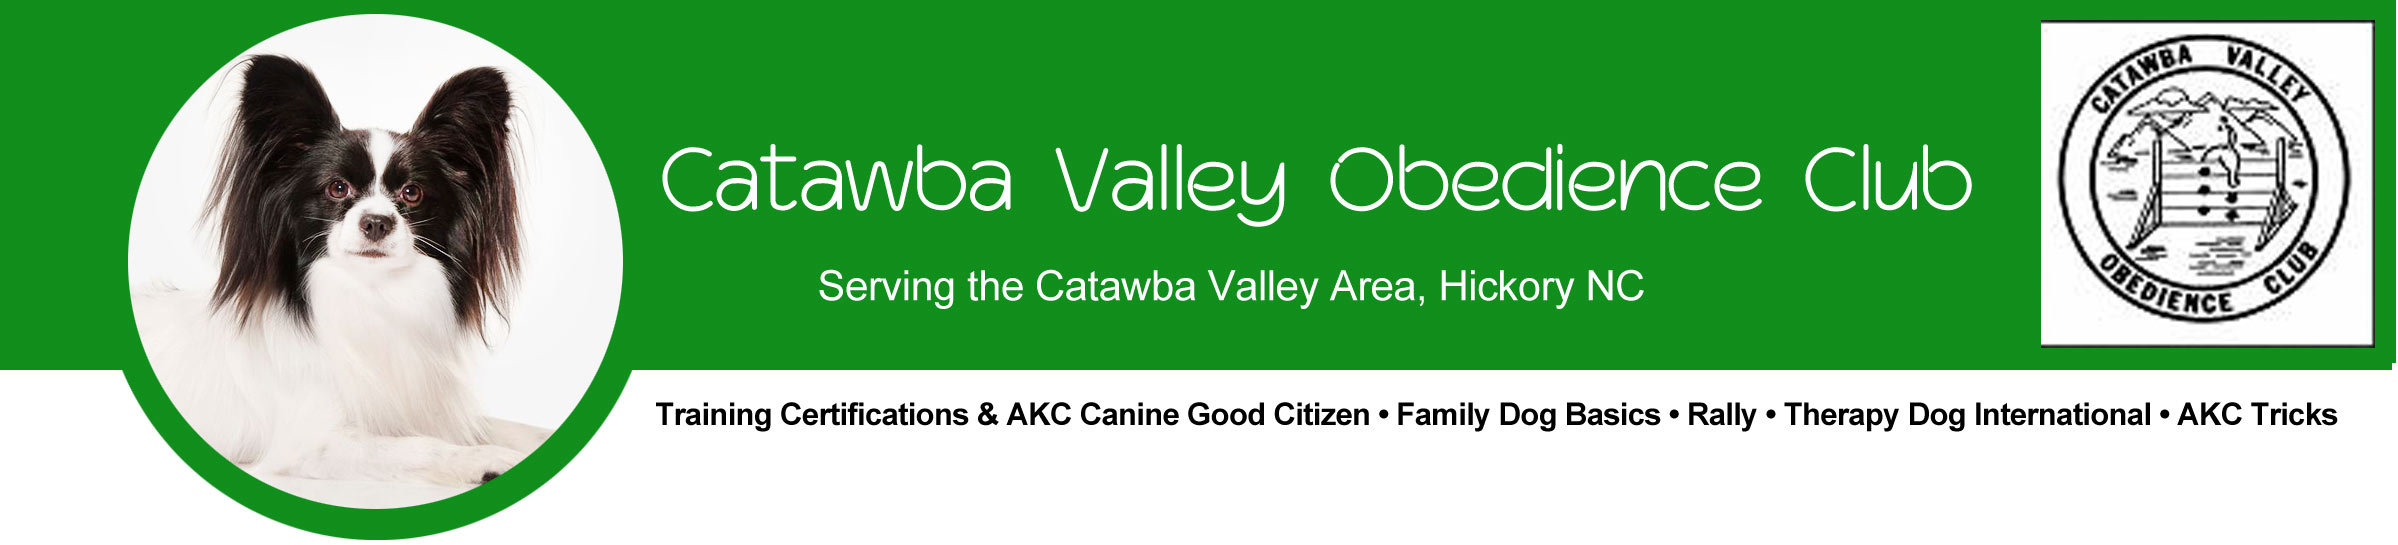 Catawba Valley Obedience Club, Hickory NC